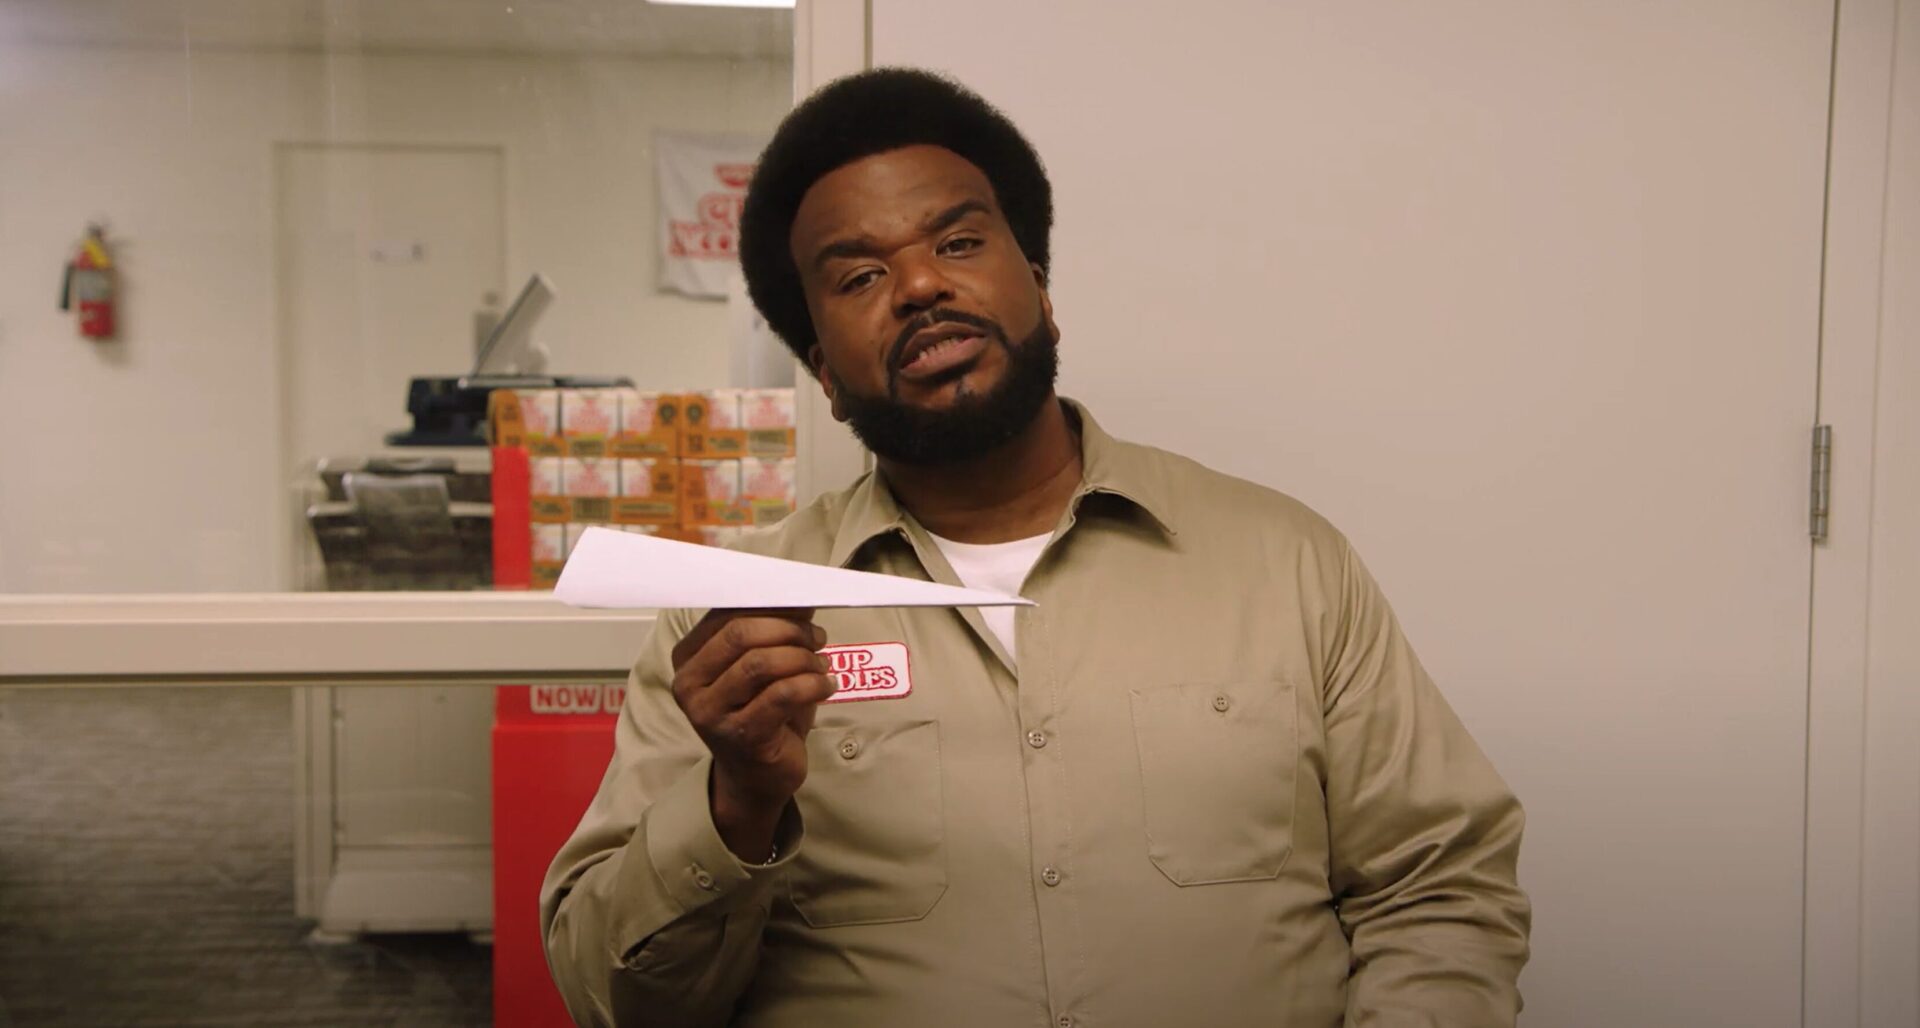 CUP NOODLES® AND CRAIG ROBINSON TEAM UP FOR HILARIOUS NEW PSA AS THE BRAND’S NOW MICROWAVEABLE PACKAGING ROLLS OUT IN THE U.S.